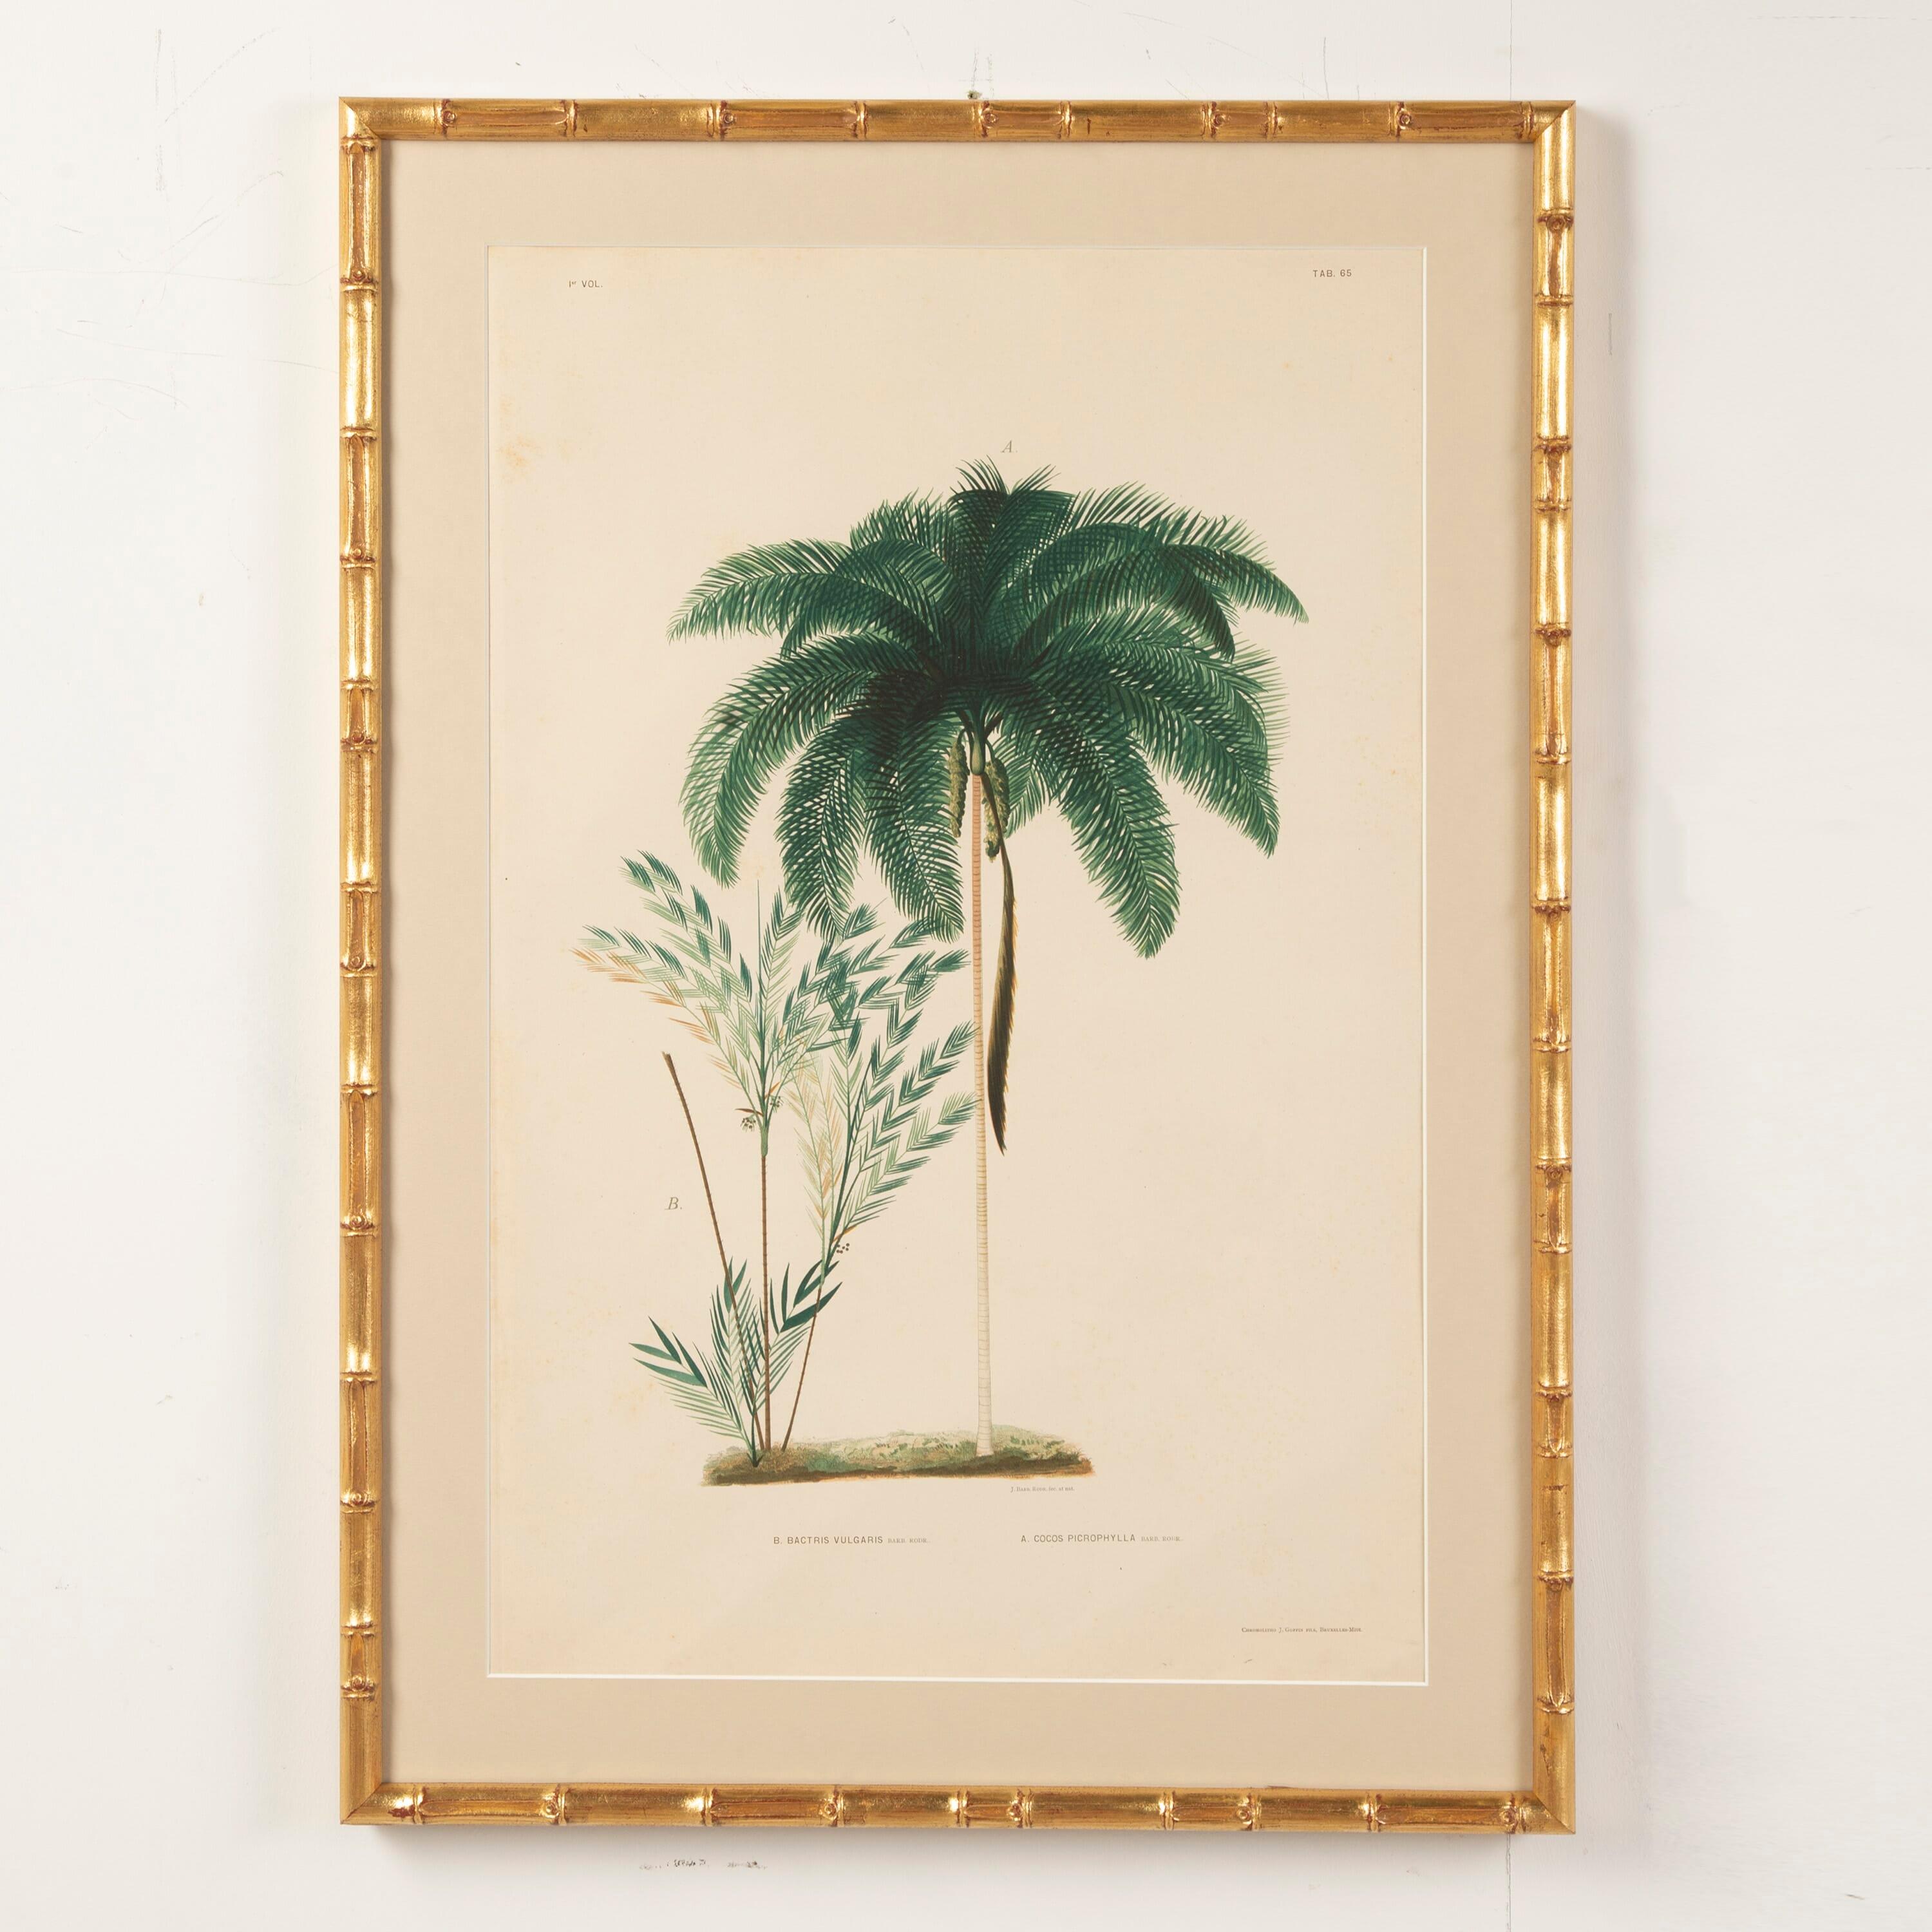 Country Six Chromolithographs of Brazilian Palms by Joao Barbosa Rodrigues